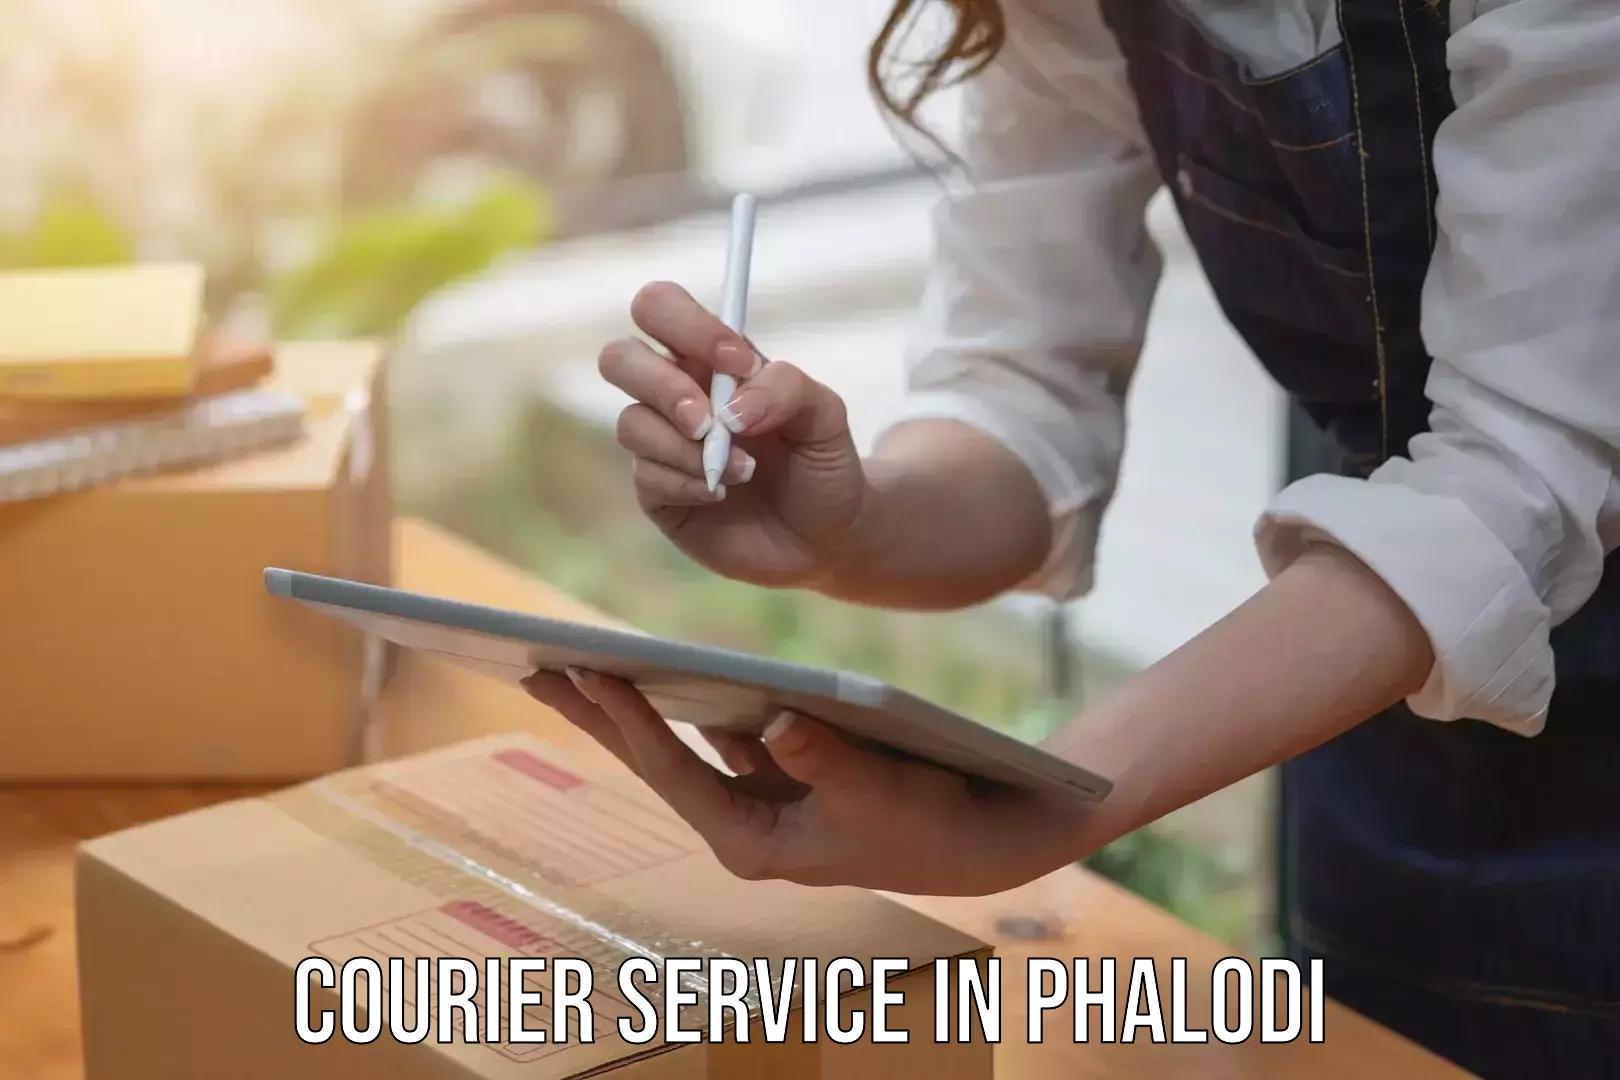 Small parcel delivery in Phalodi